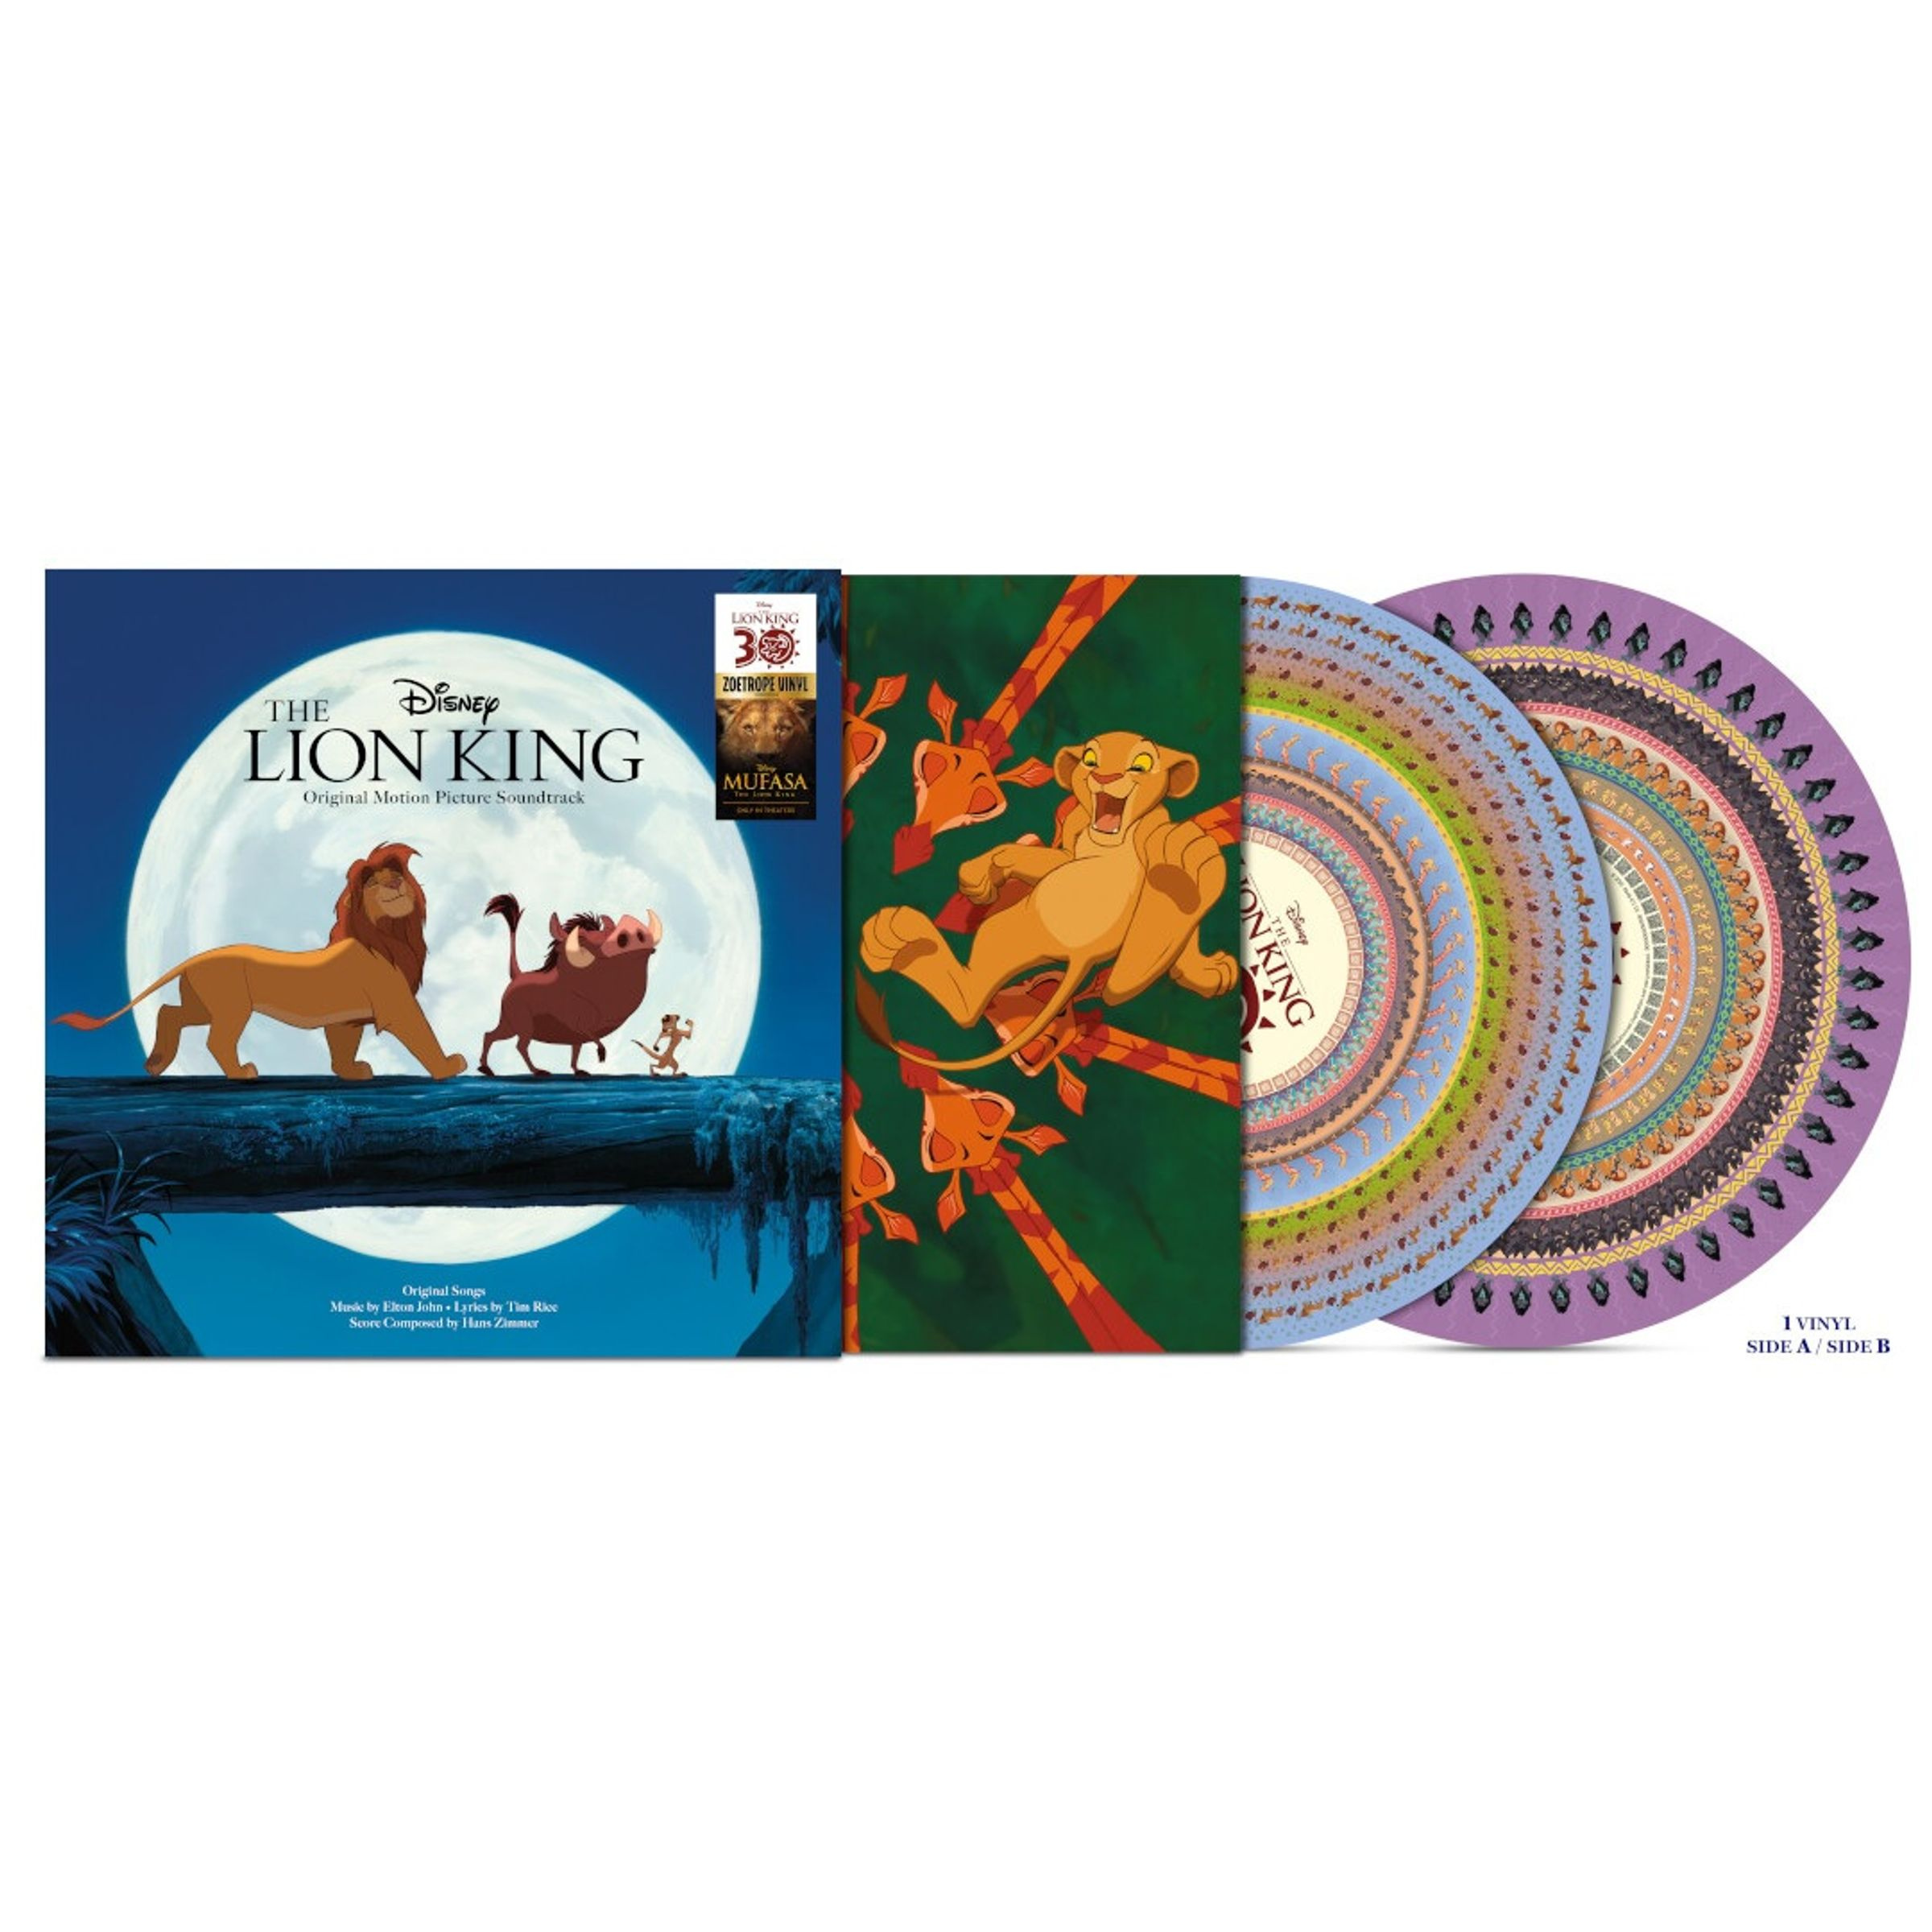 THE LION KING 30TH - ZOETROPE DISC LTD. ED.